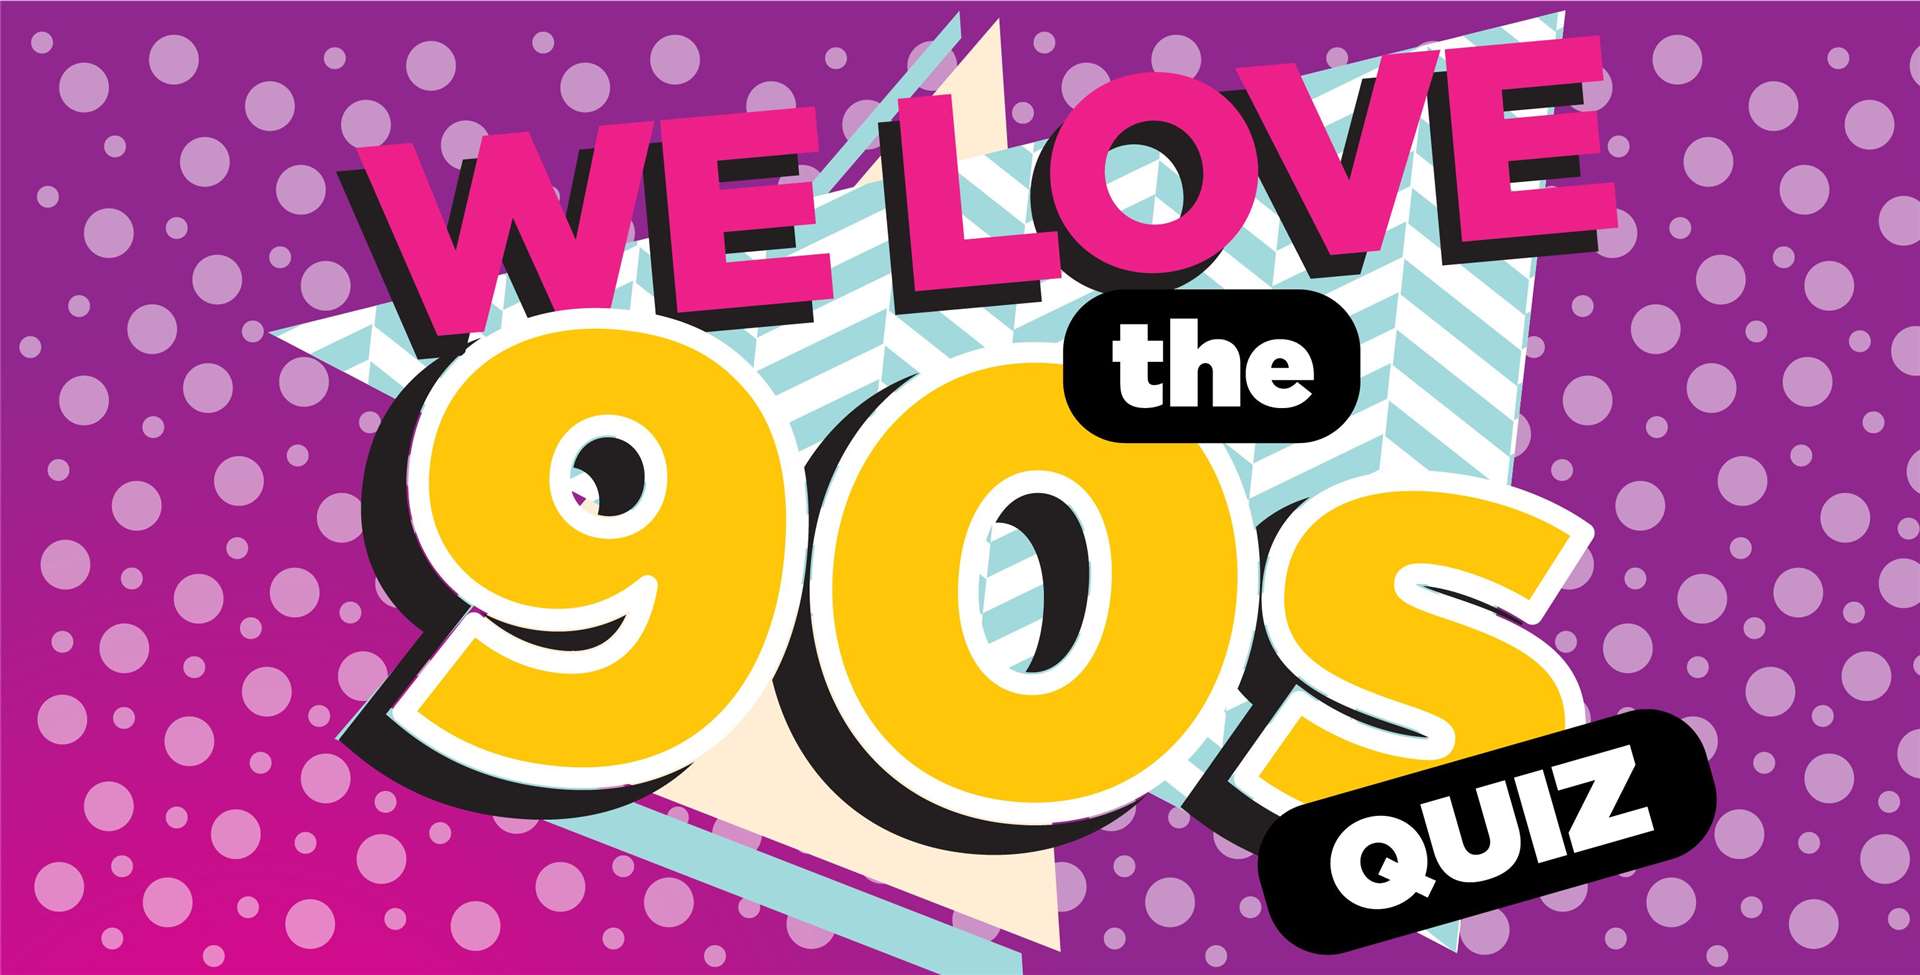 It's the last day of the We Love the 90s quiz